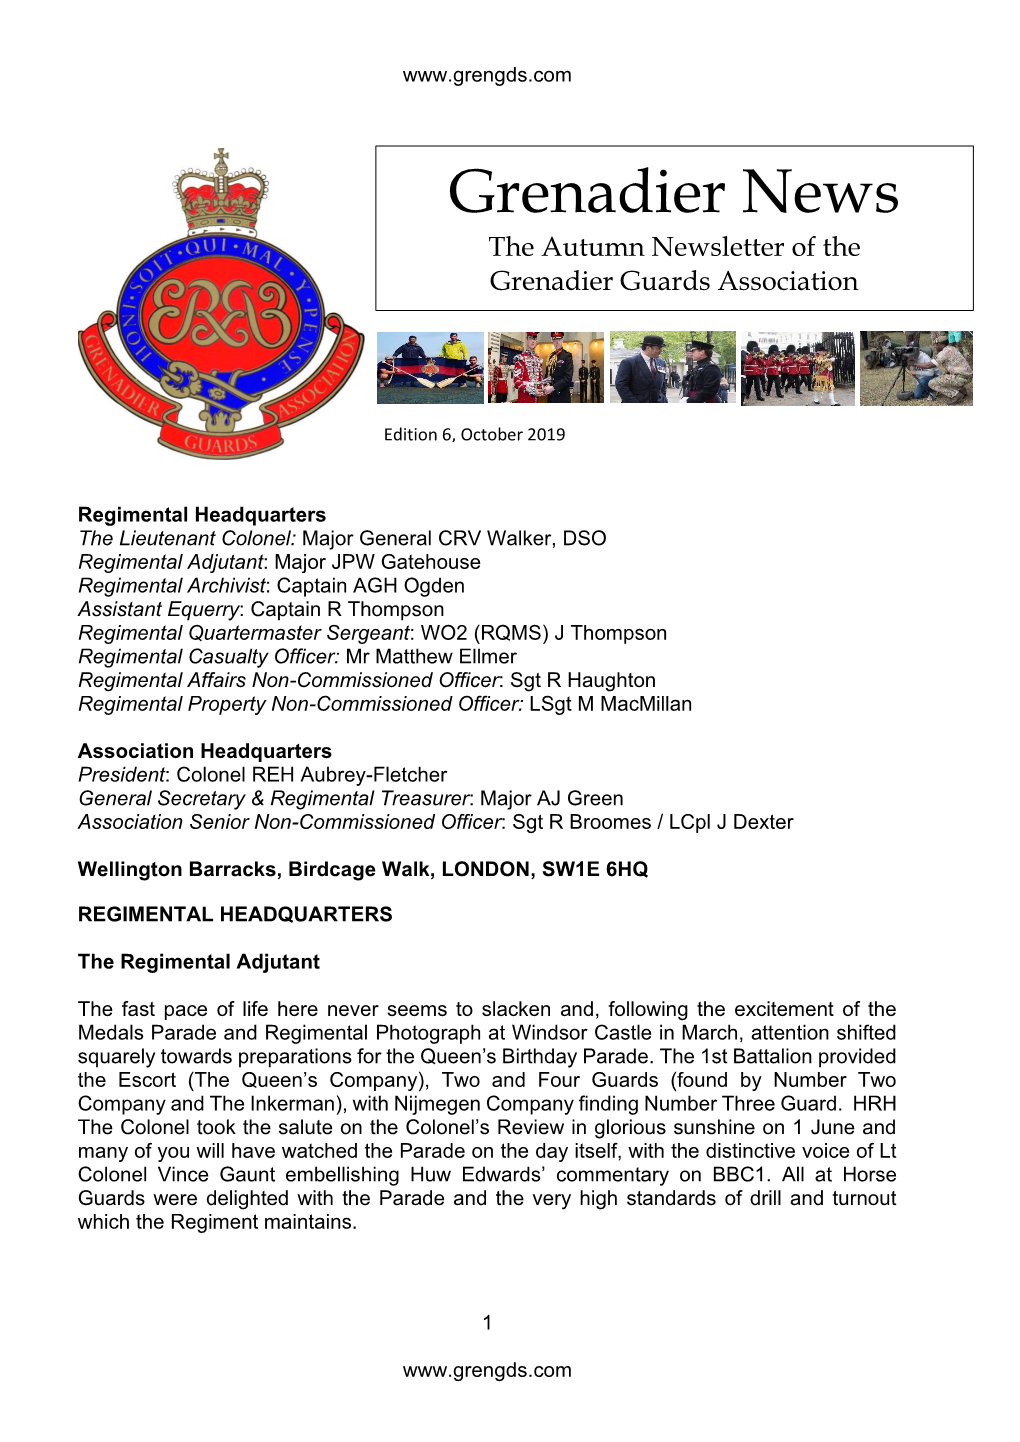 Grenadier News the Autumn Newsletter of the Grenadier Guards Association